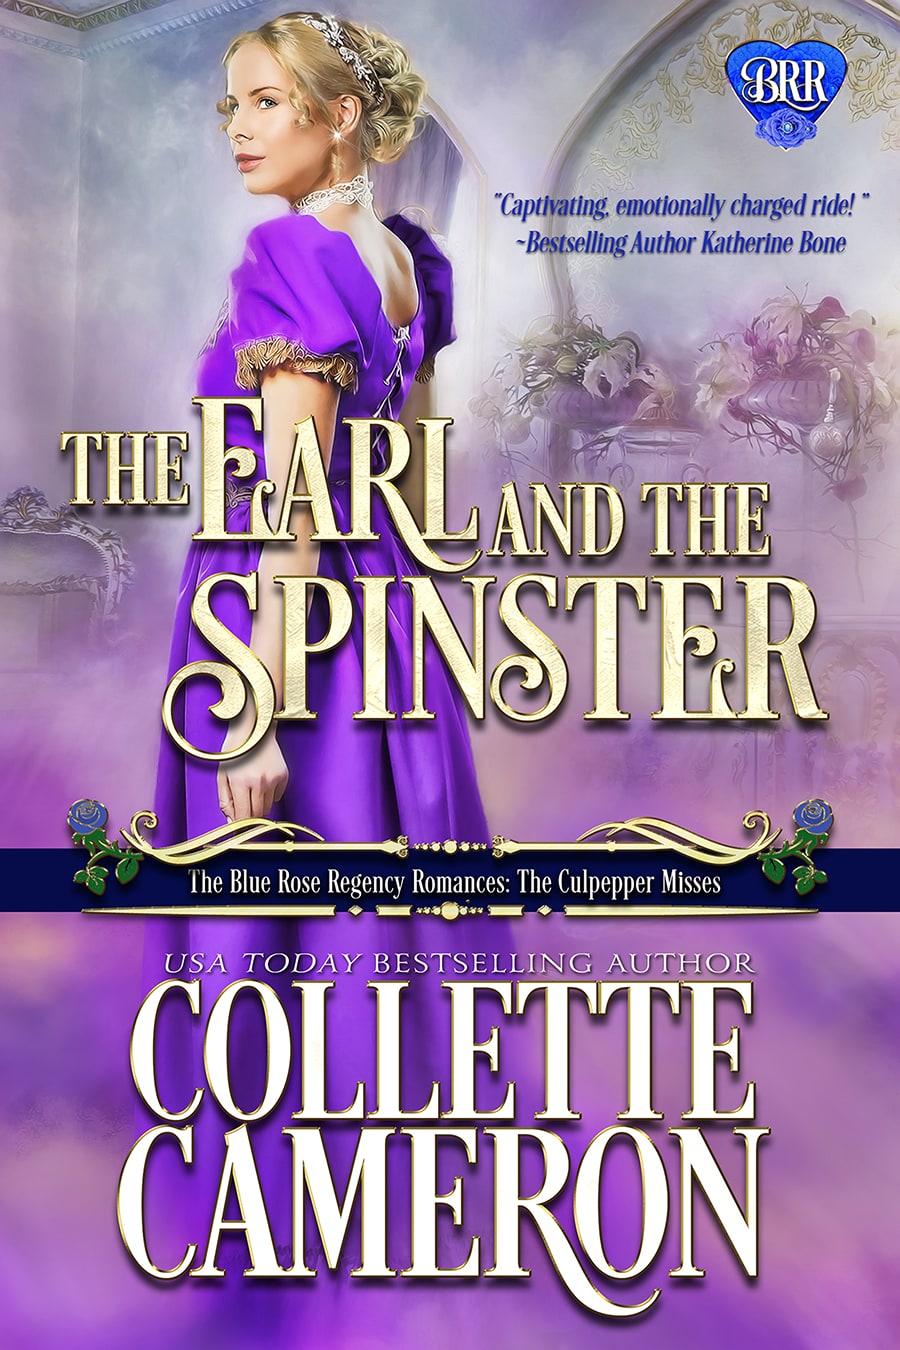 The Earl and the Spinster is only 99¢! 1